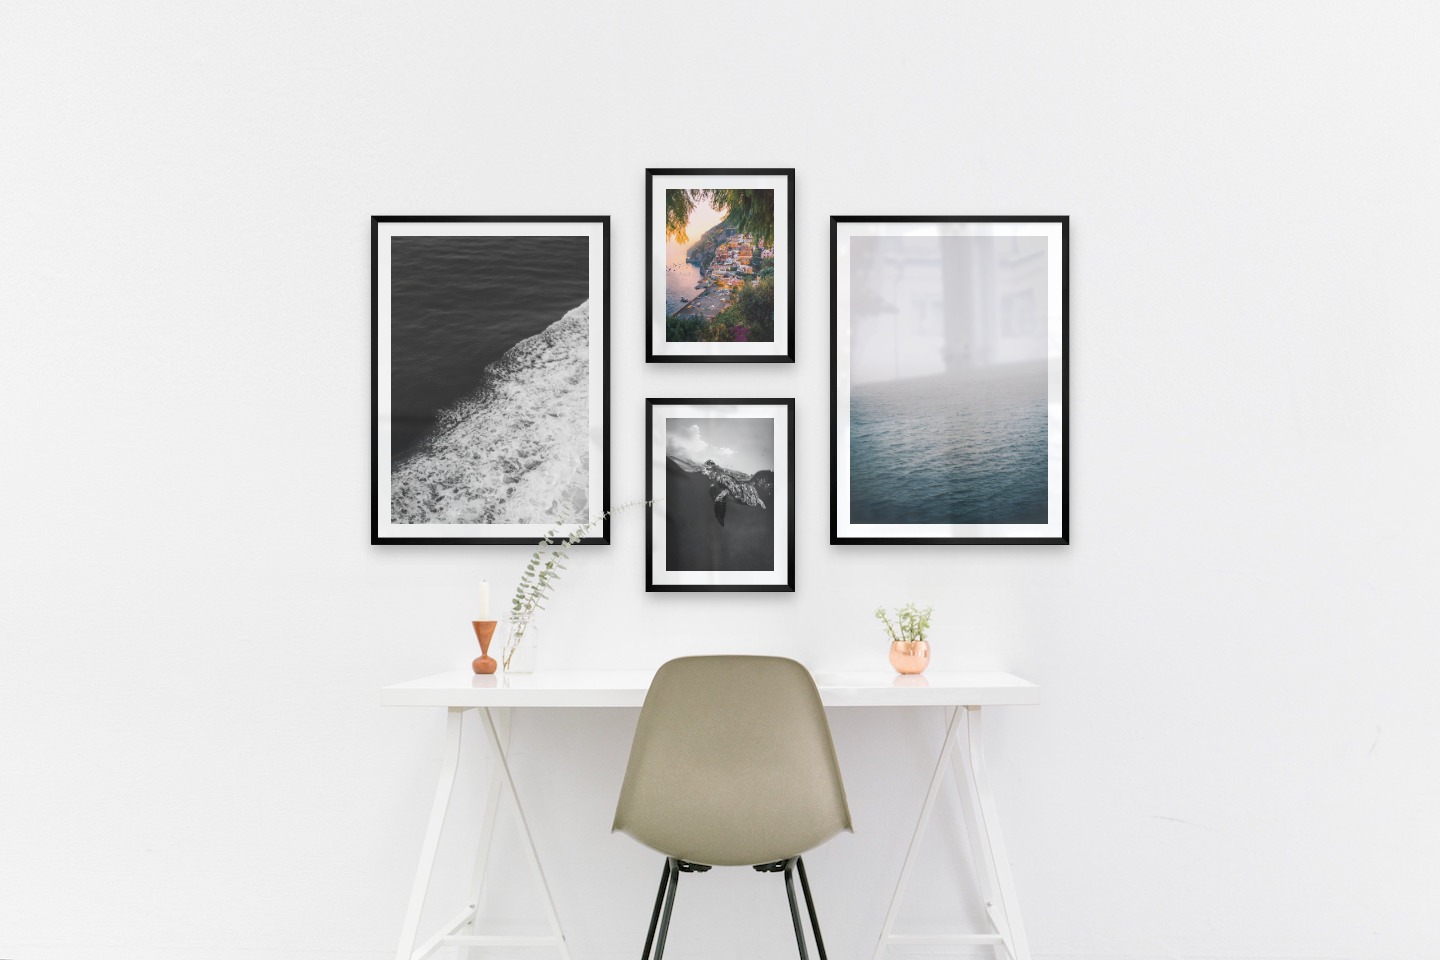 Gallery wall with picture frames in black in sizes 50x70 and 30x40 with prints "Swell from waves", "City by the sea", "Turtle" and "Fog over the sea"